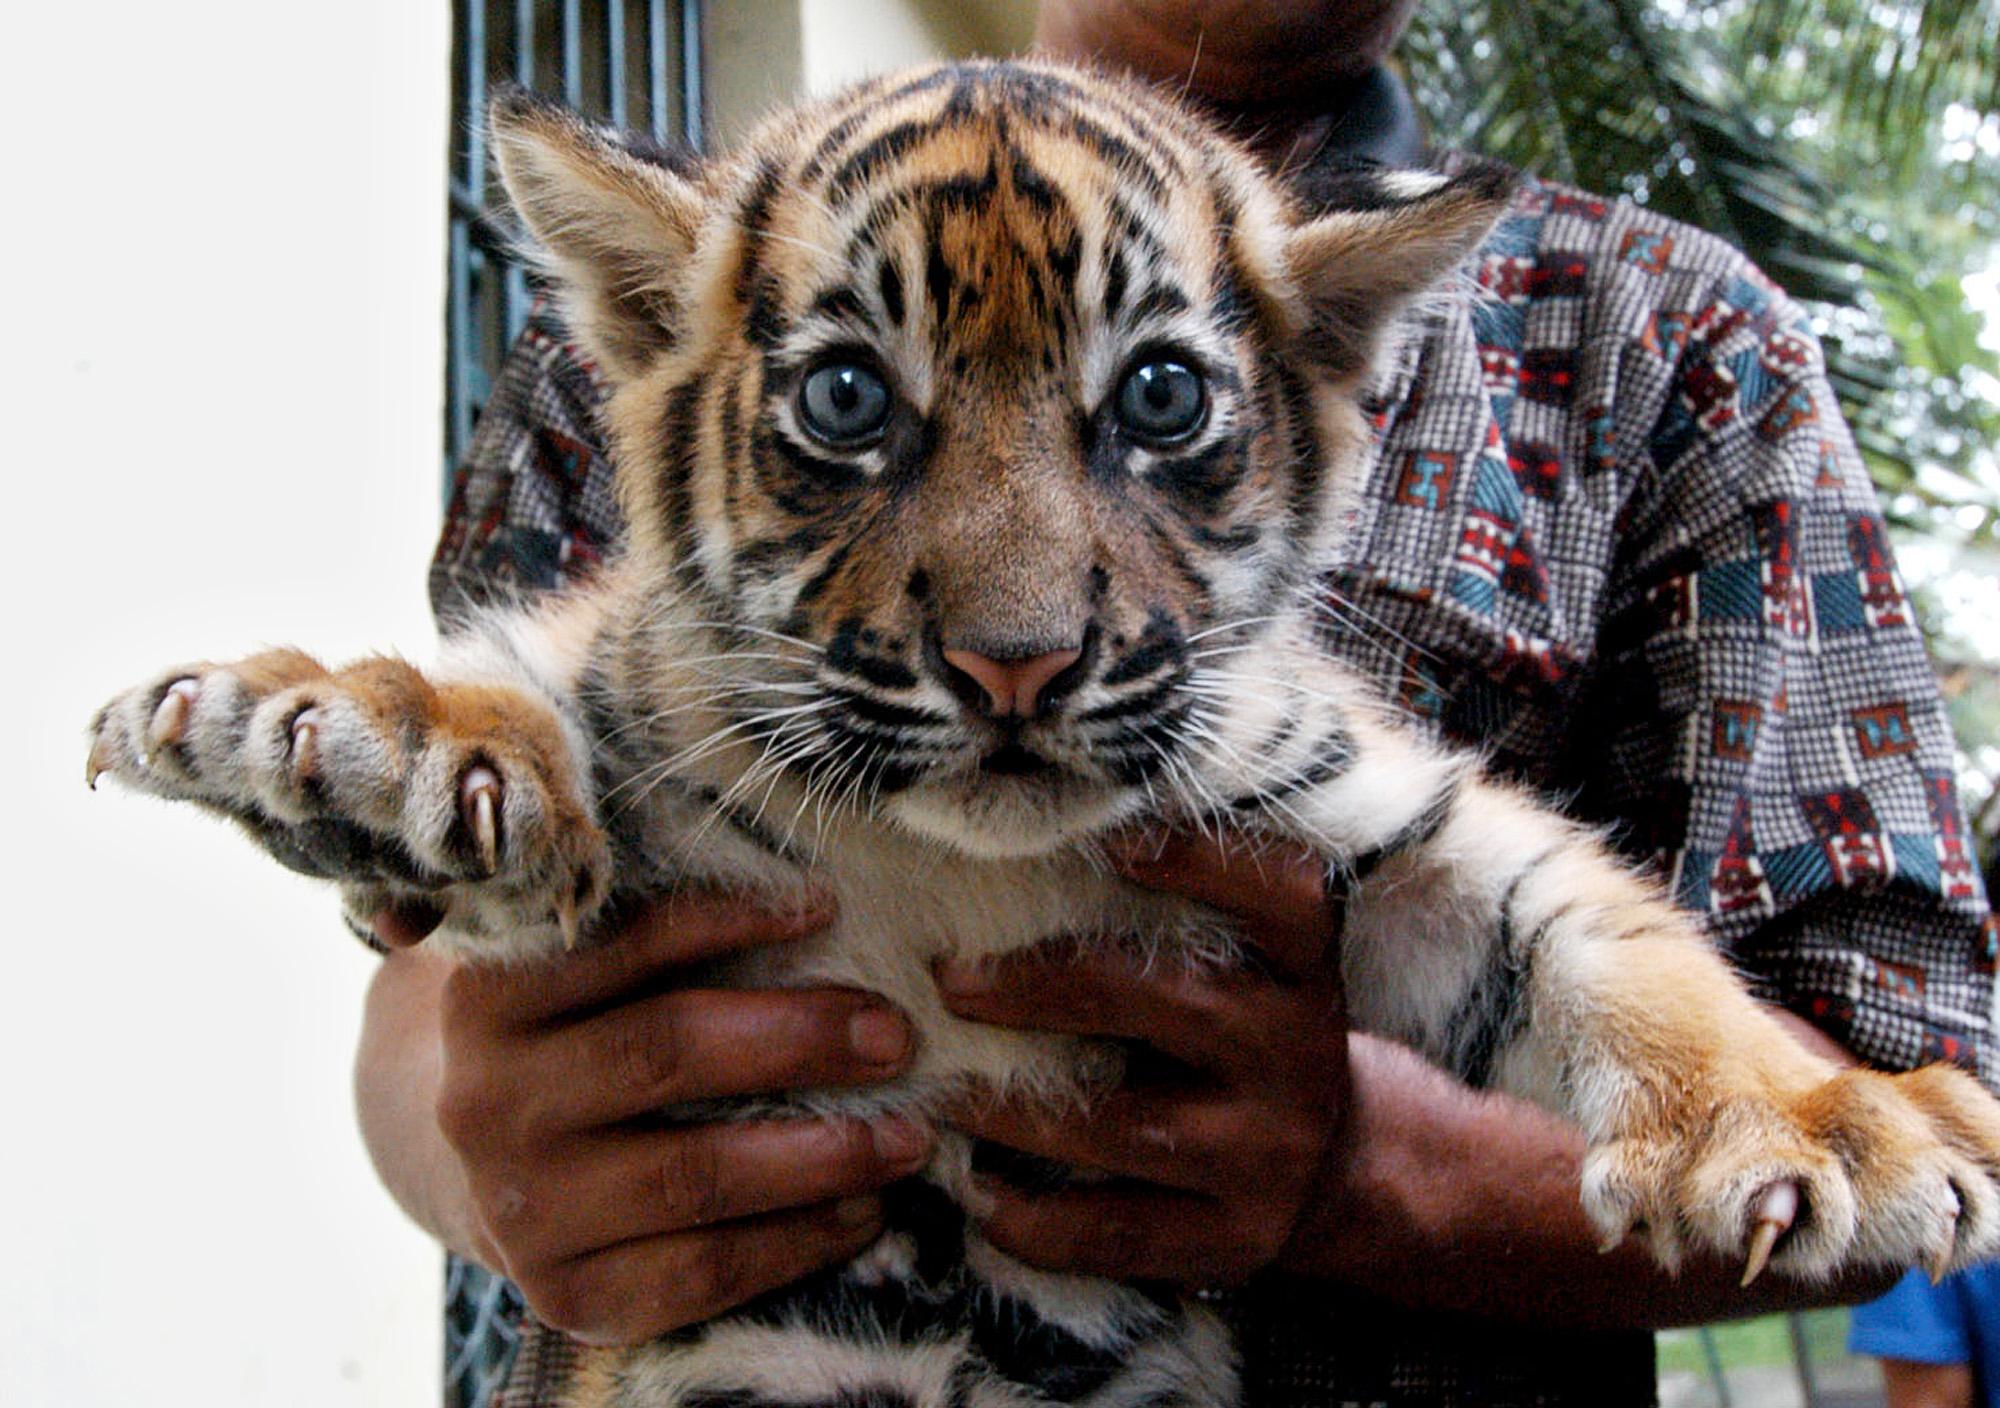 Mexico: Someone tried to mail a tiger cub | The Spokesman-Review